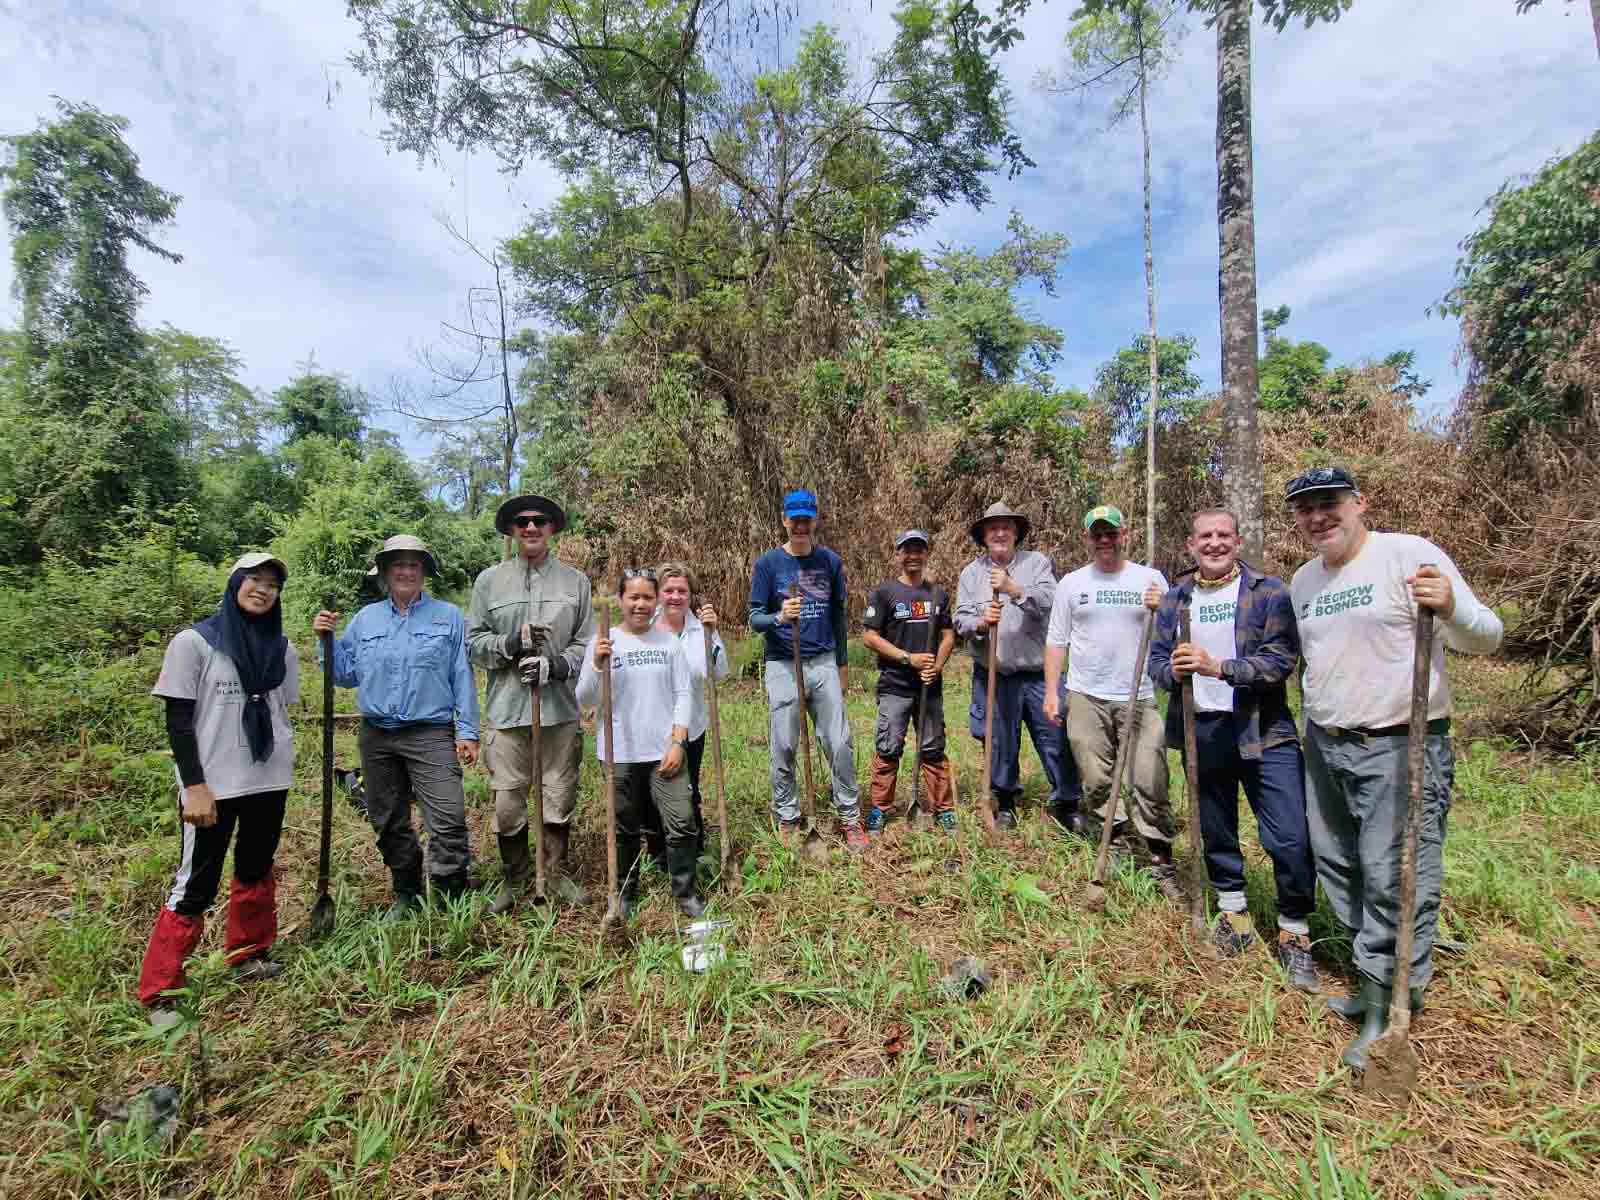 Delegation from Cardiff and Wyoming visit the Regrow Borneo reforestation site.